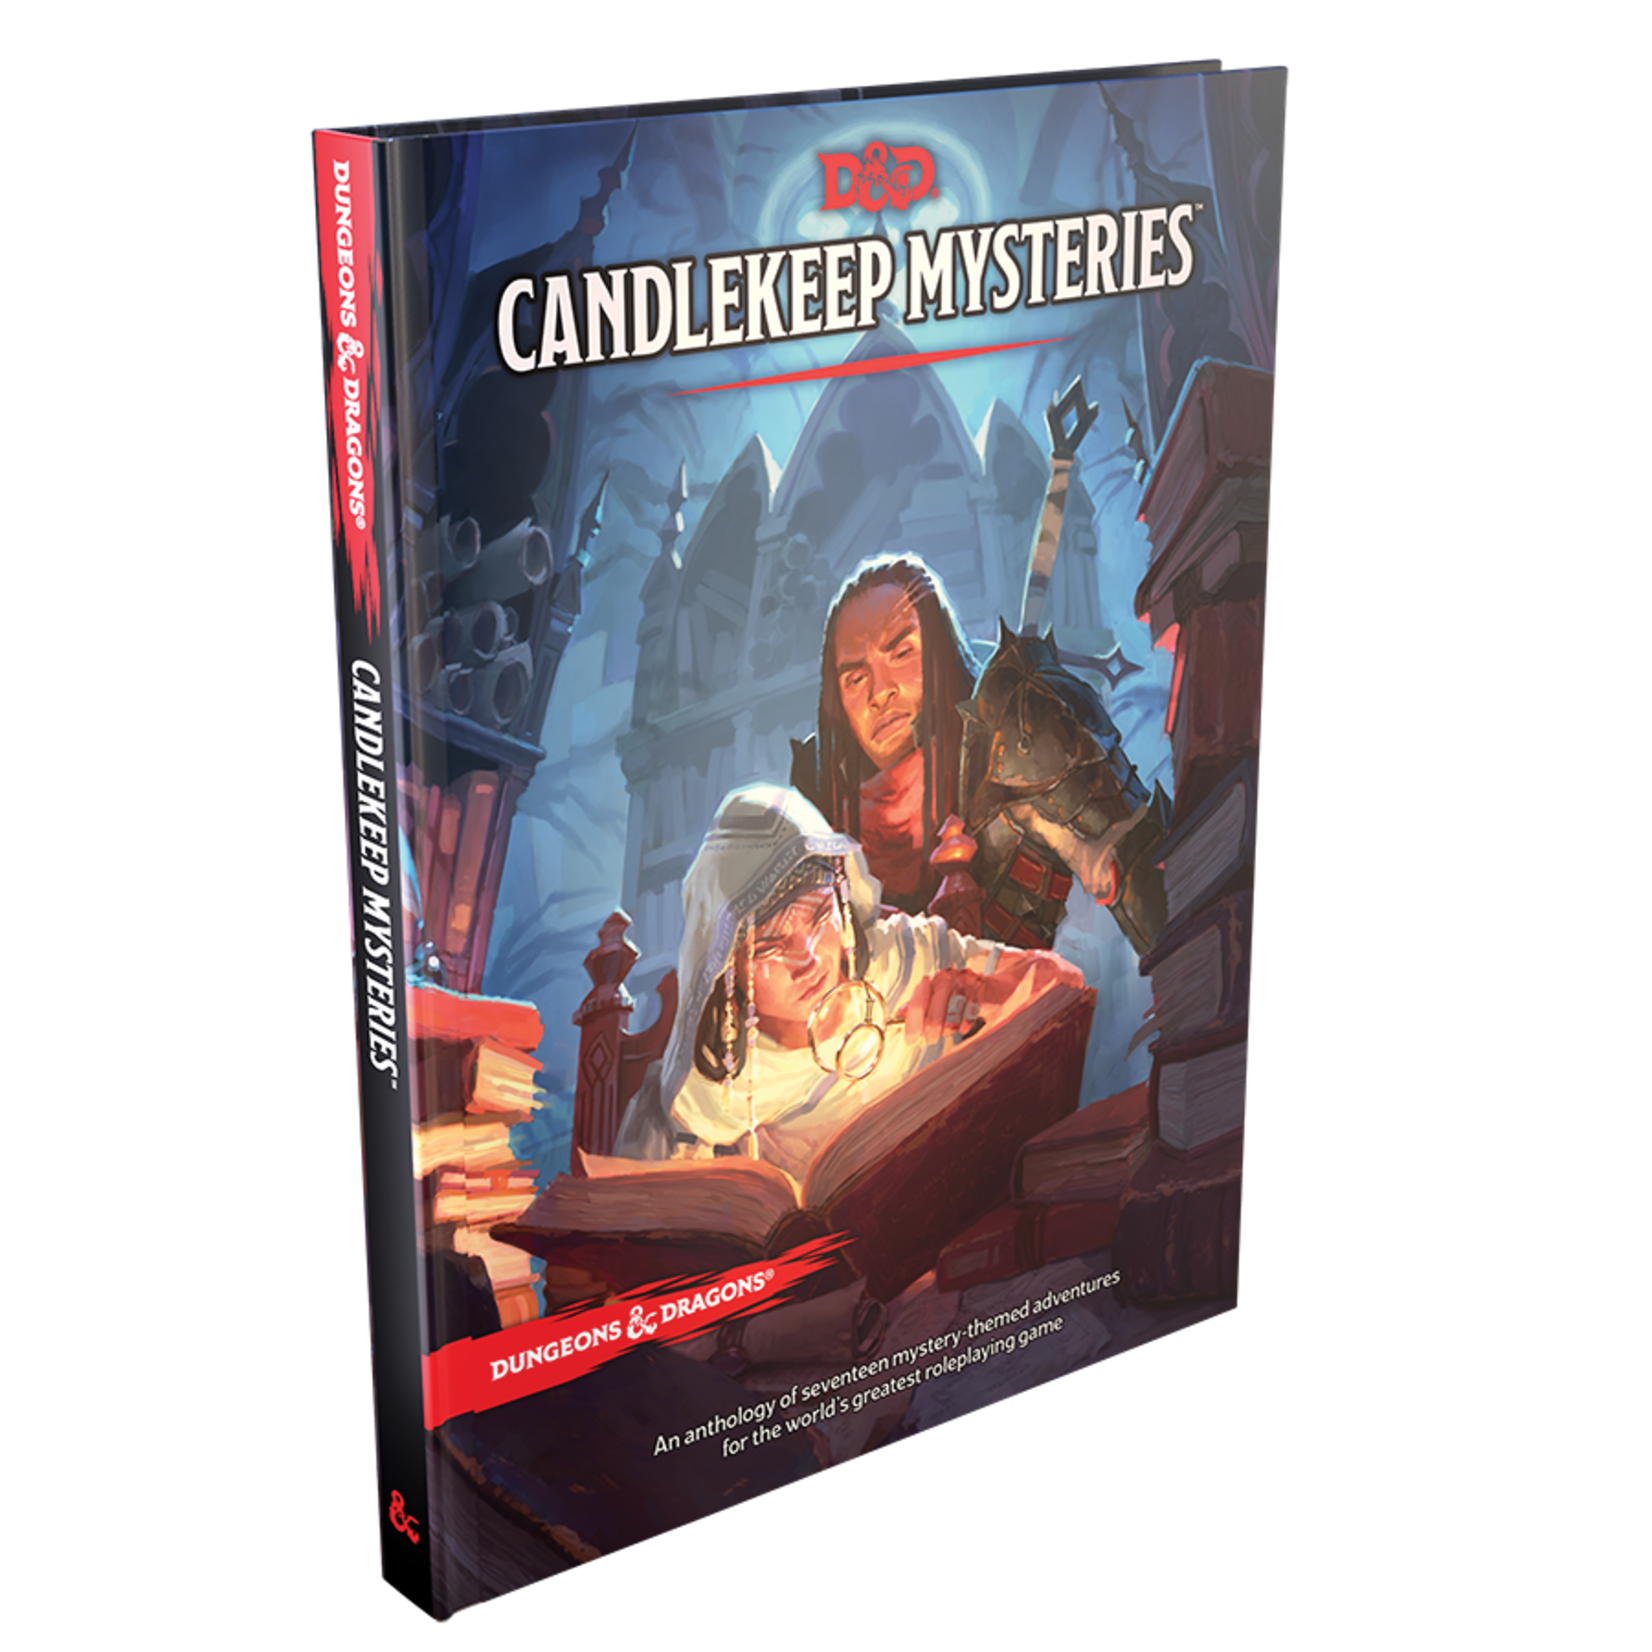 Dungeons & Dragons Dungeons & Dragons – Candlekeep Mysteries ( 5th Edition, Regular Cover)